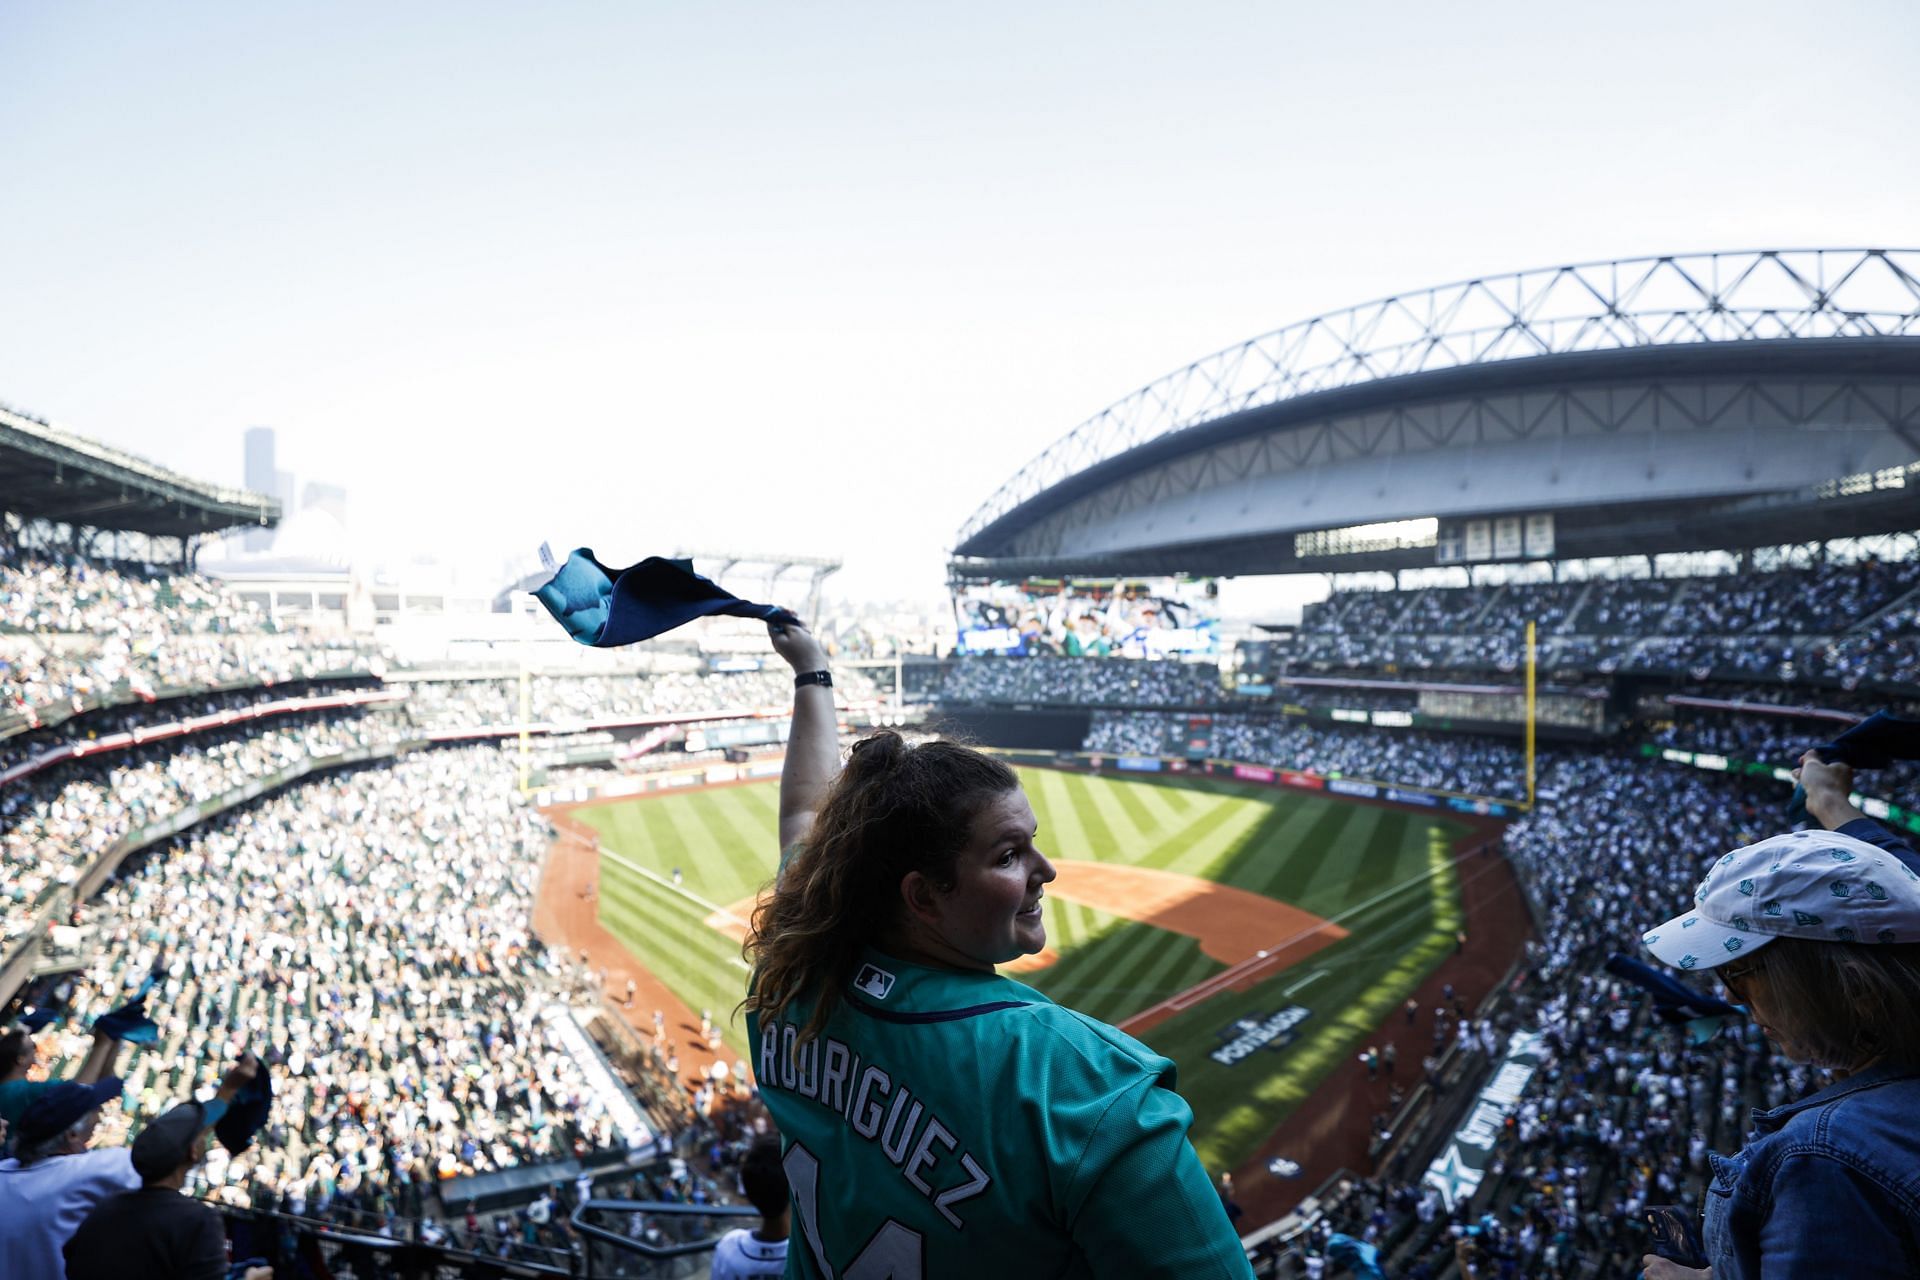 A fan cheers before Game 3 of the &lt;a href=&#039;https://www.sportskeeda.com/go/american-league-division-series&#039; target=&#039;_blank&#039; rel=&#039;noopener noreferrer&#039;&gt;American League Division Series&lt;/a&gt; between the Houston Astros and the Seattle Mariners.